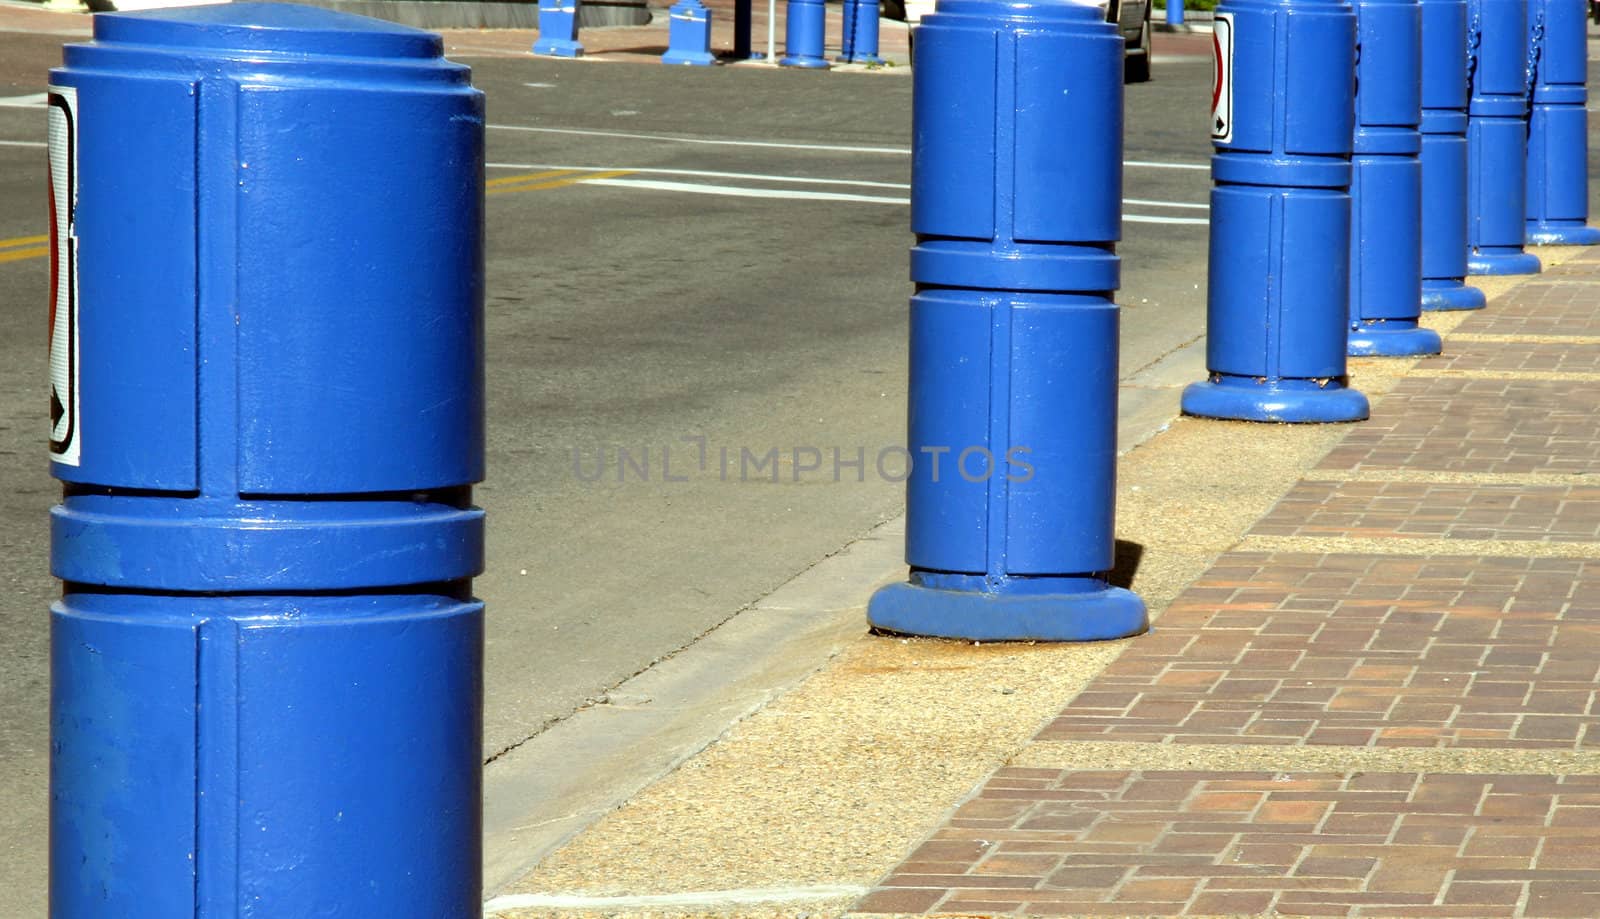 Abstruct  Blue post by the side walk